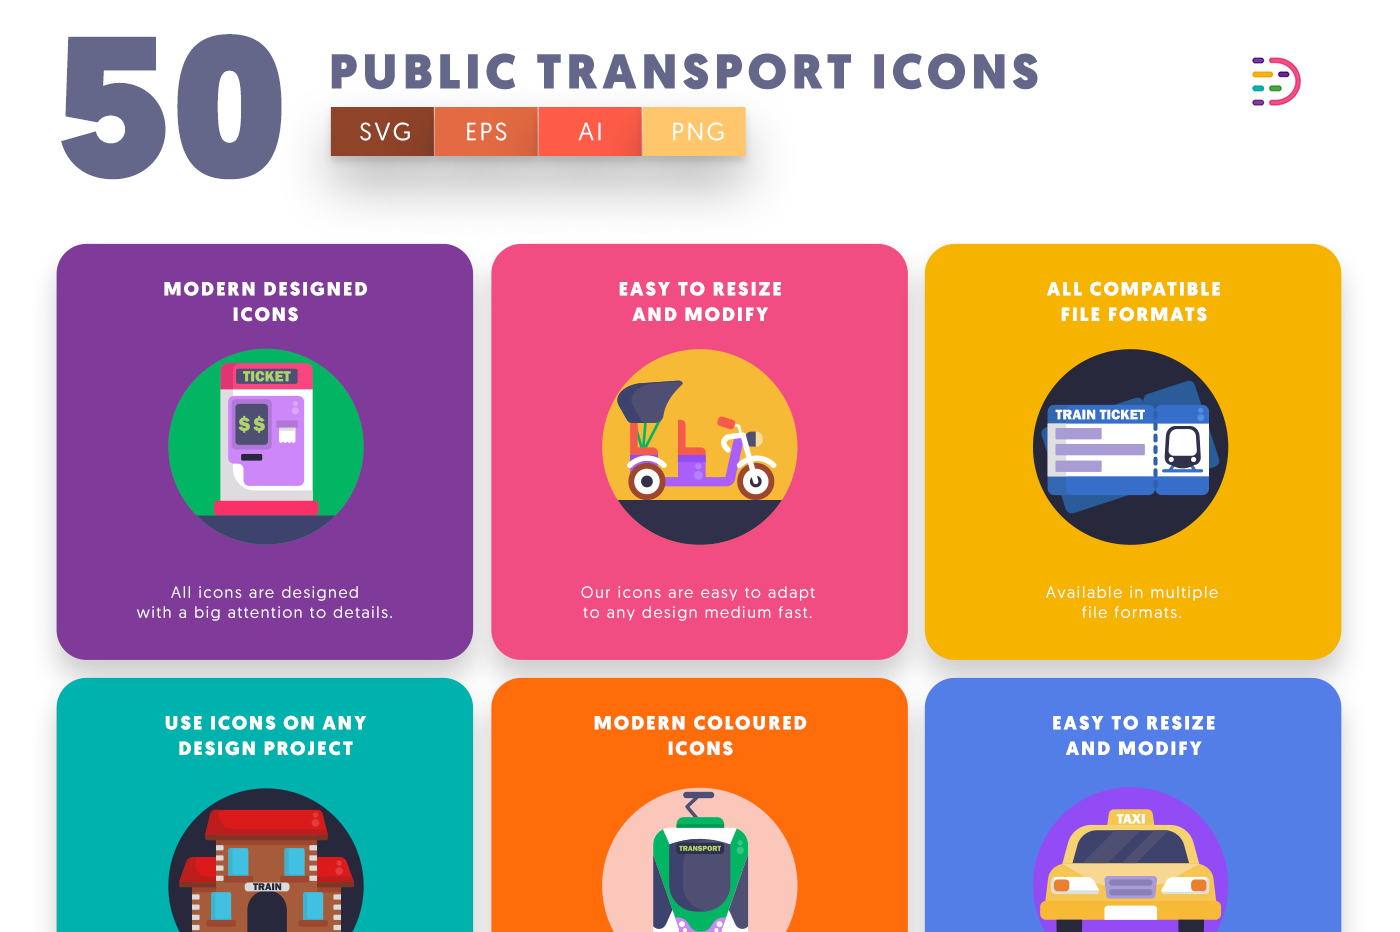  Public Transport Icons with colored backgrounds 